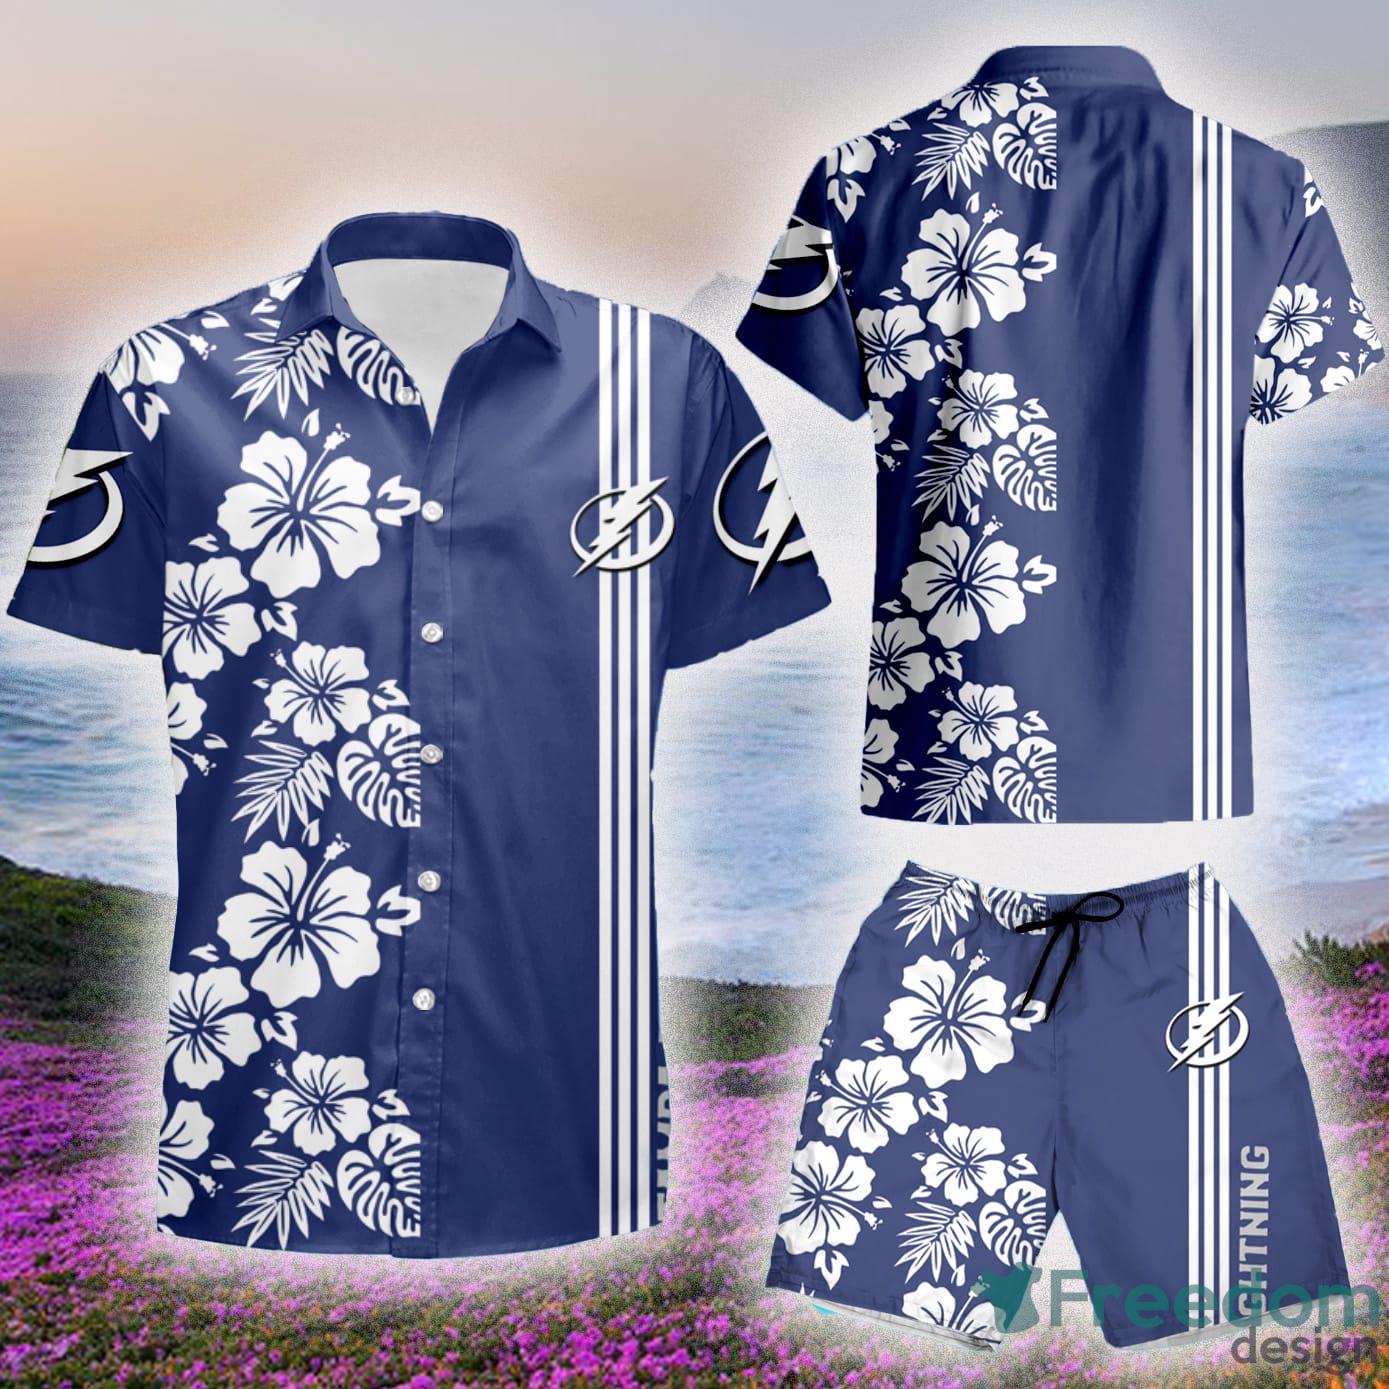 Tampa Bay Rays Set 3D Hawaiian Shirt And Short Gift For Men And Women -  Freedomdesign